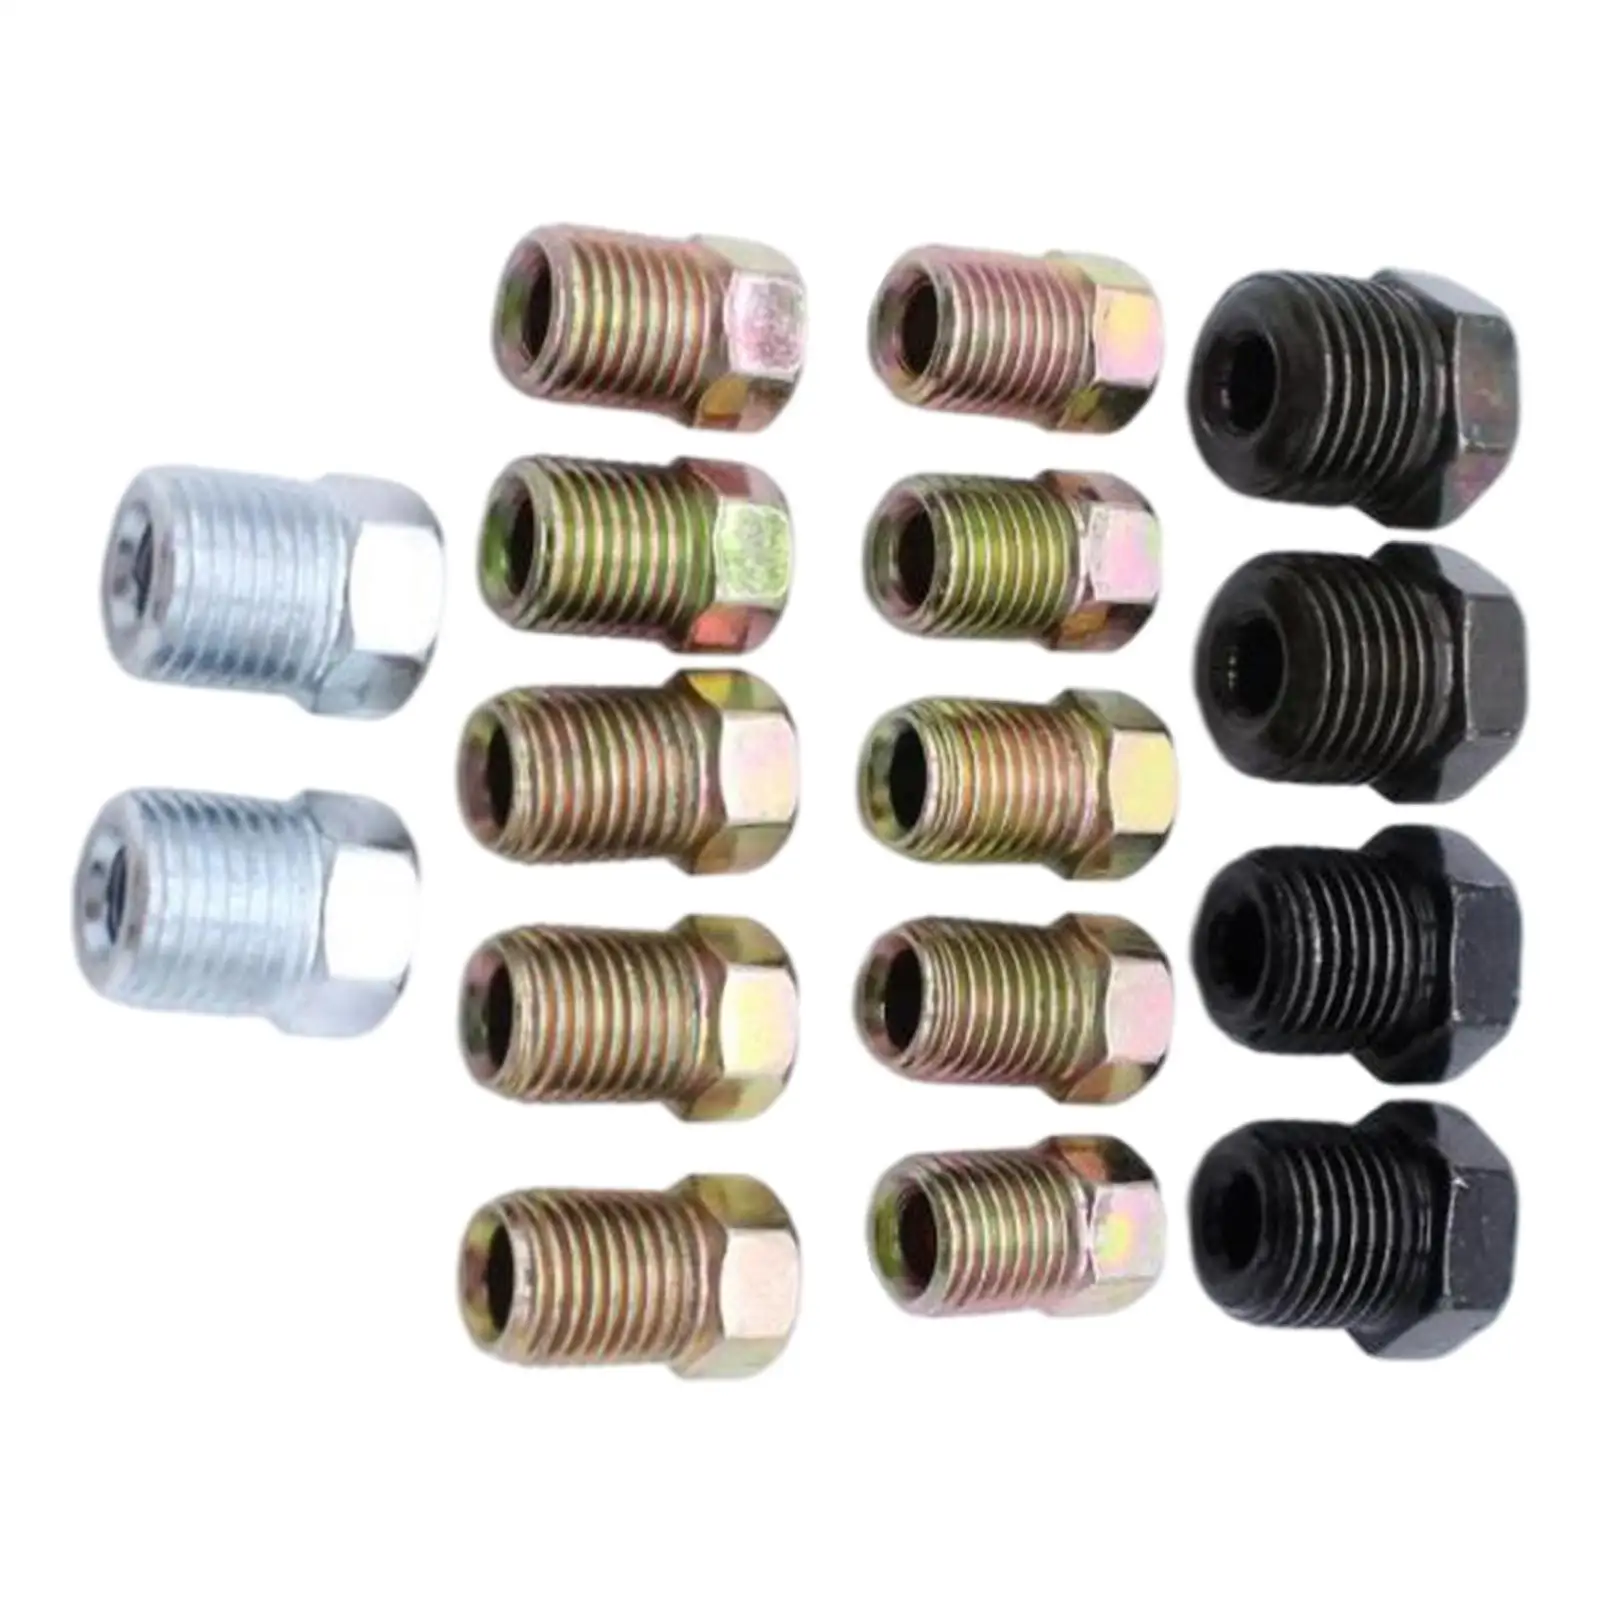 16Pcs Inverted  Tube Nuts 2x 7/16-2x -24 2x 9/16-18 Threads Nuts Fit for 3/16 Tube Brake Line  Accessories